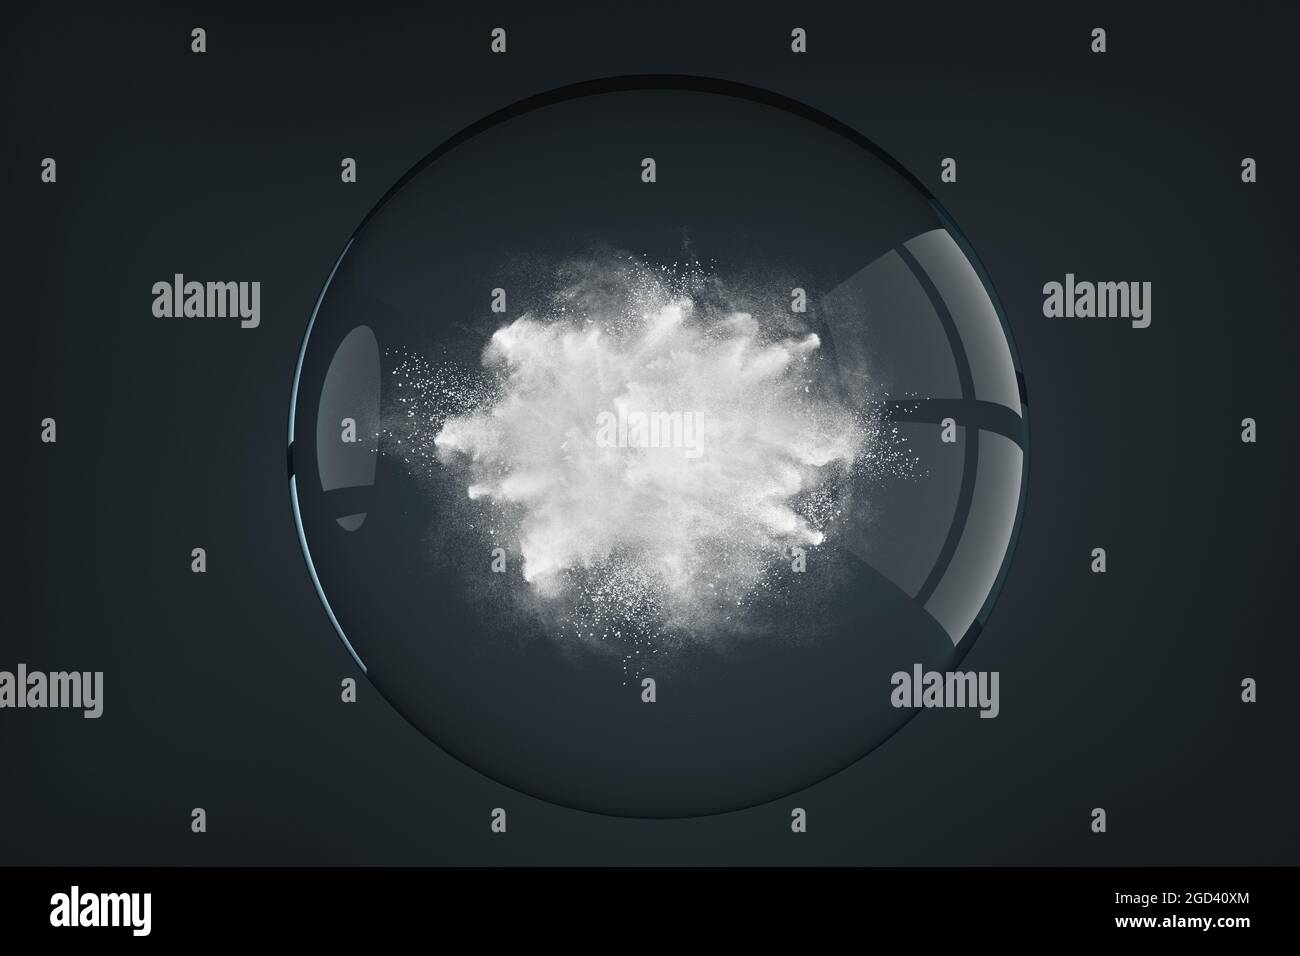 Abstract design of powder or smoke particles cloud explosion on dark background inside the transparent glass sphere Stock Photo